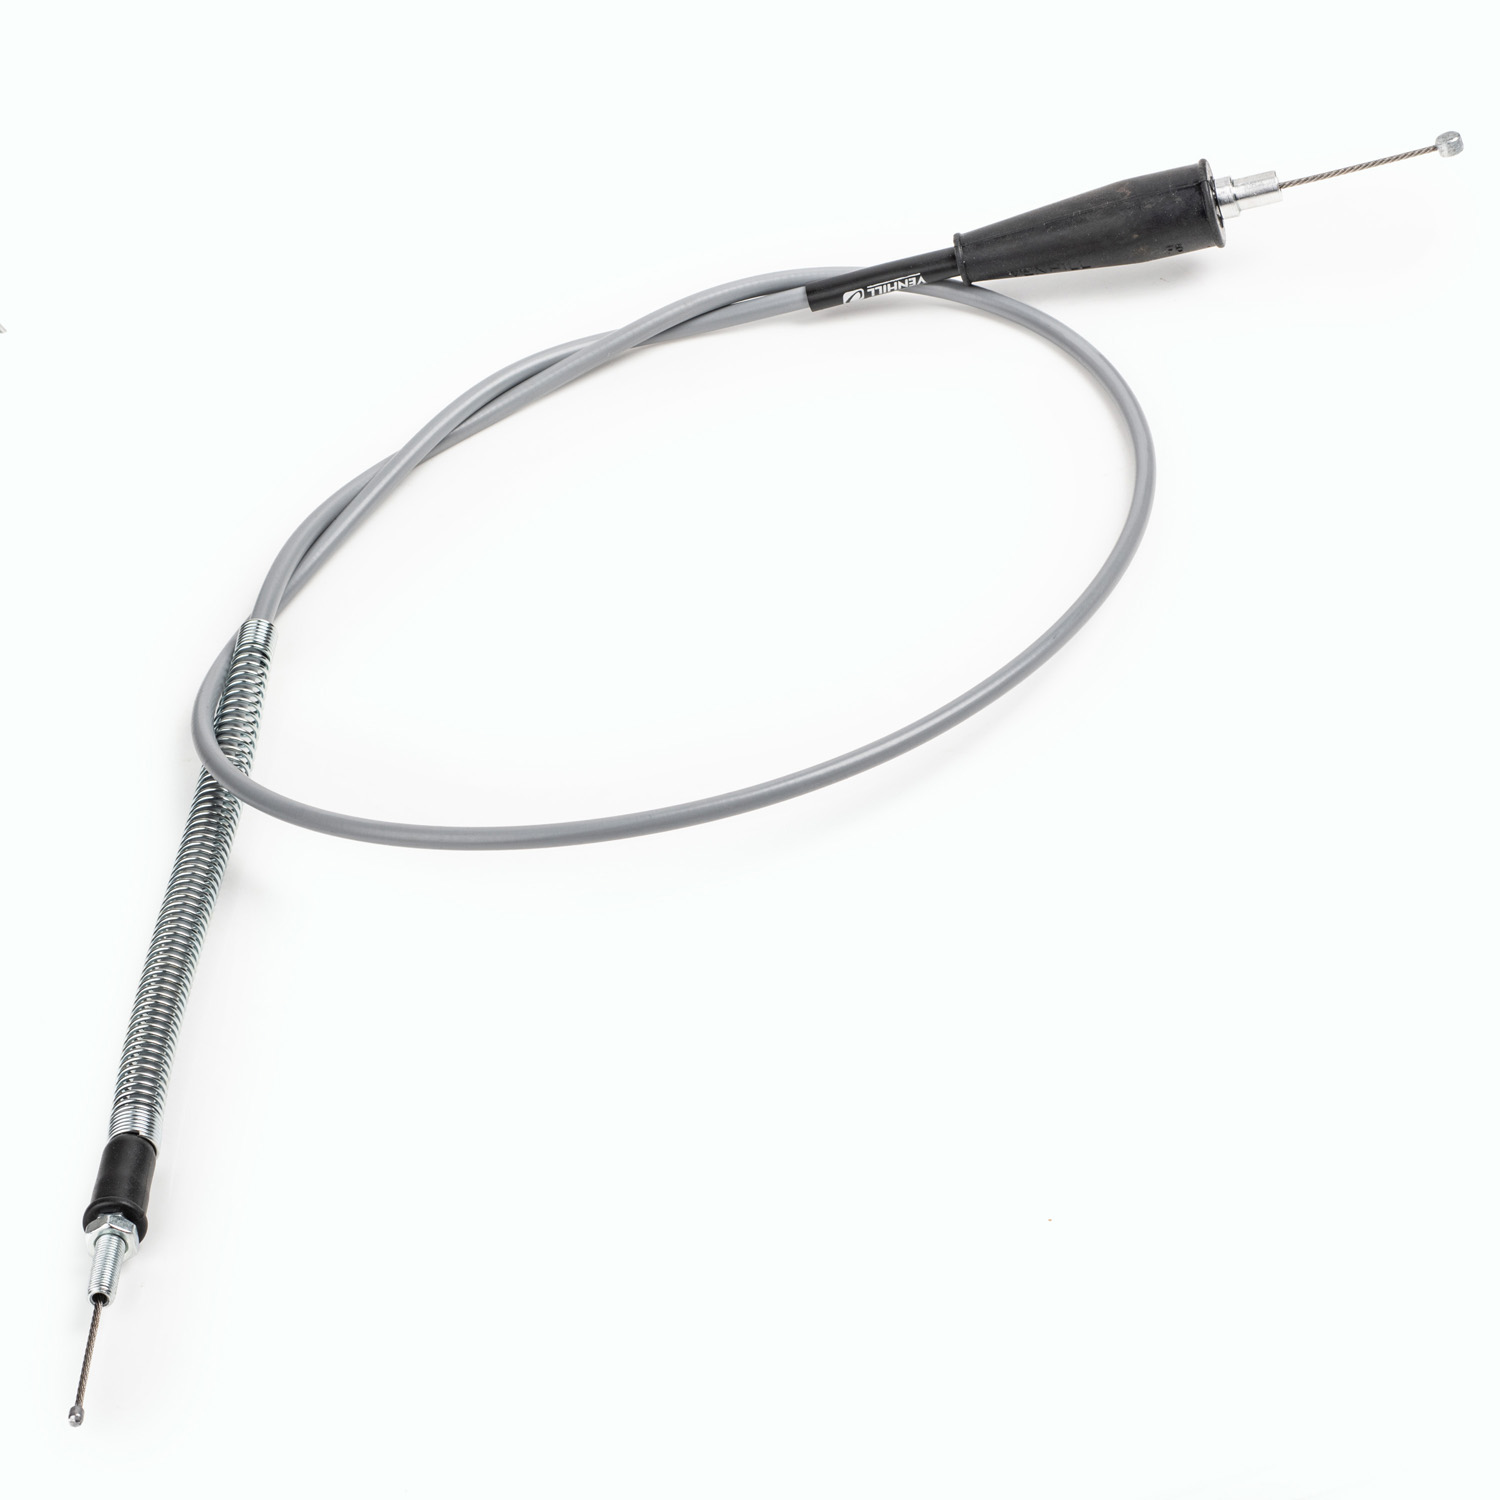 TY250A Throttle Cable for Standard/OEM Twistgrip